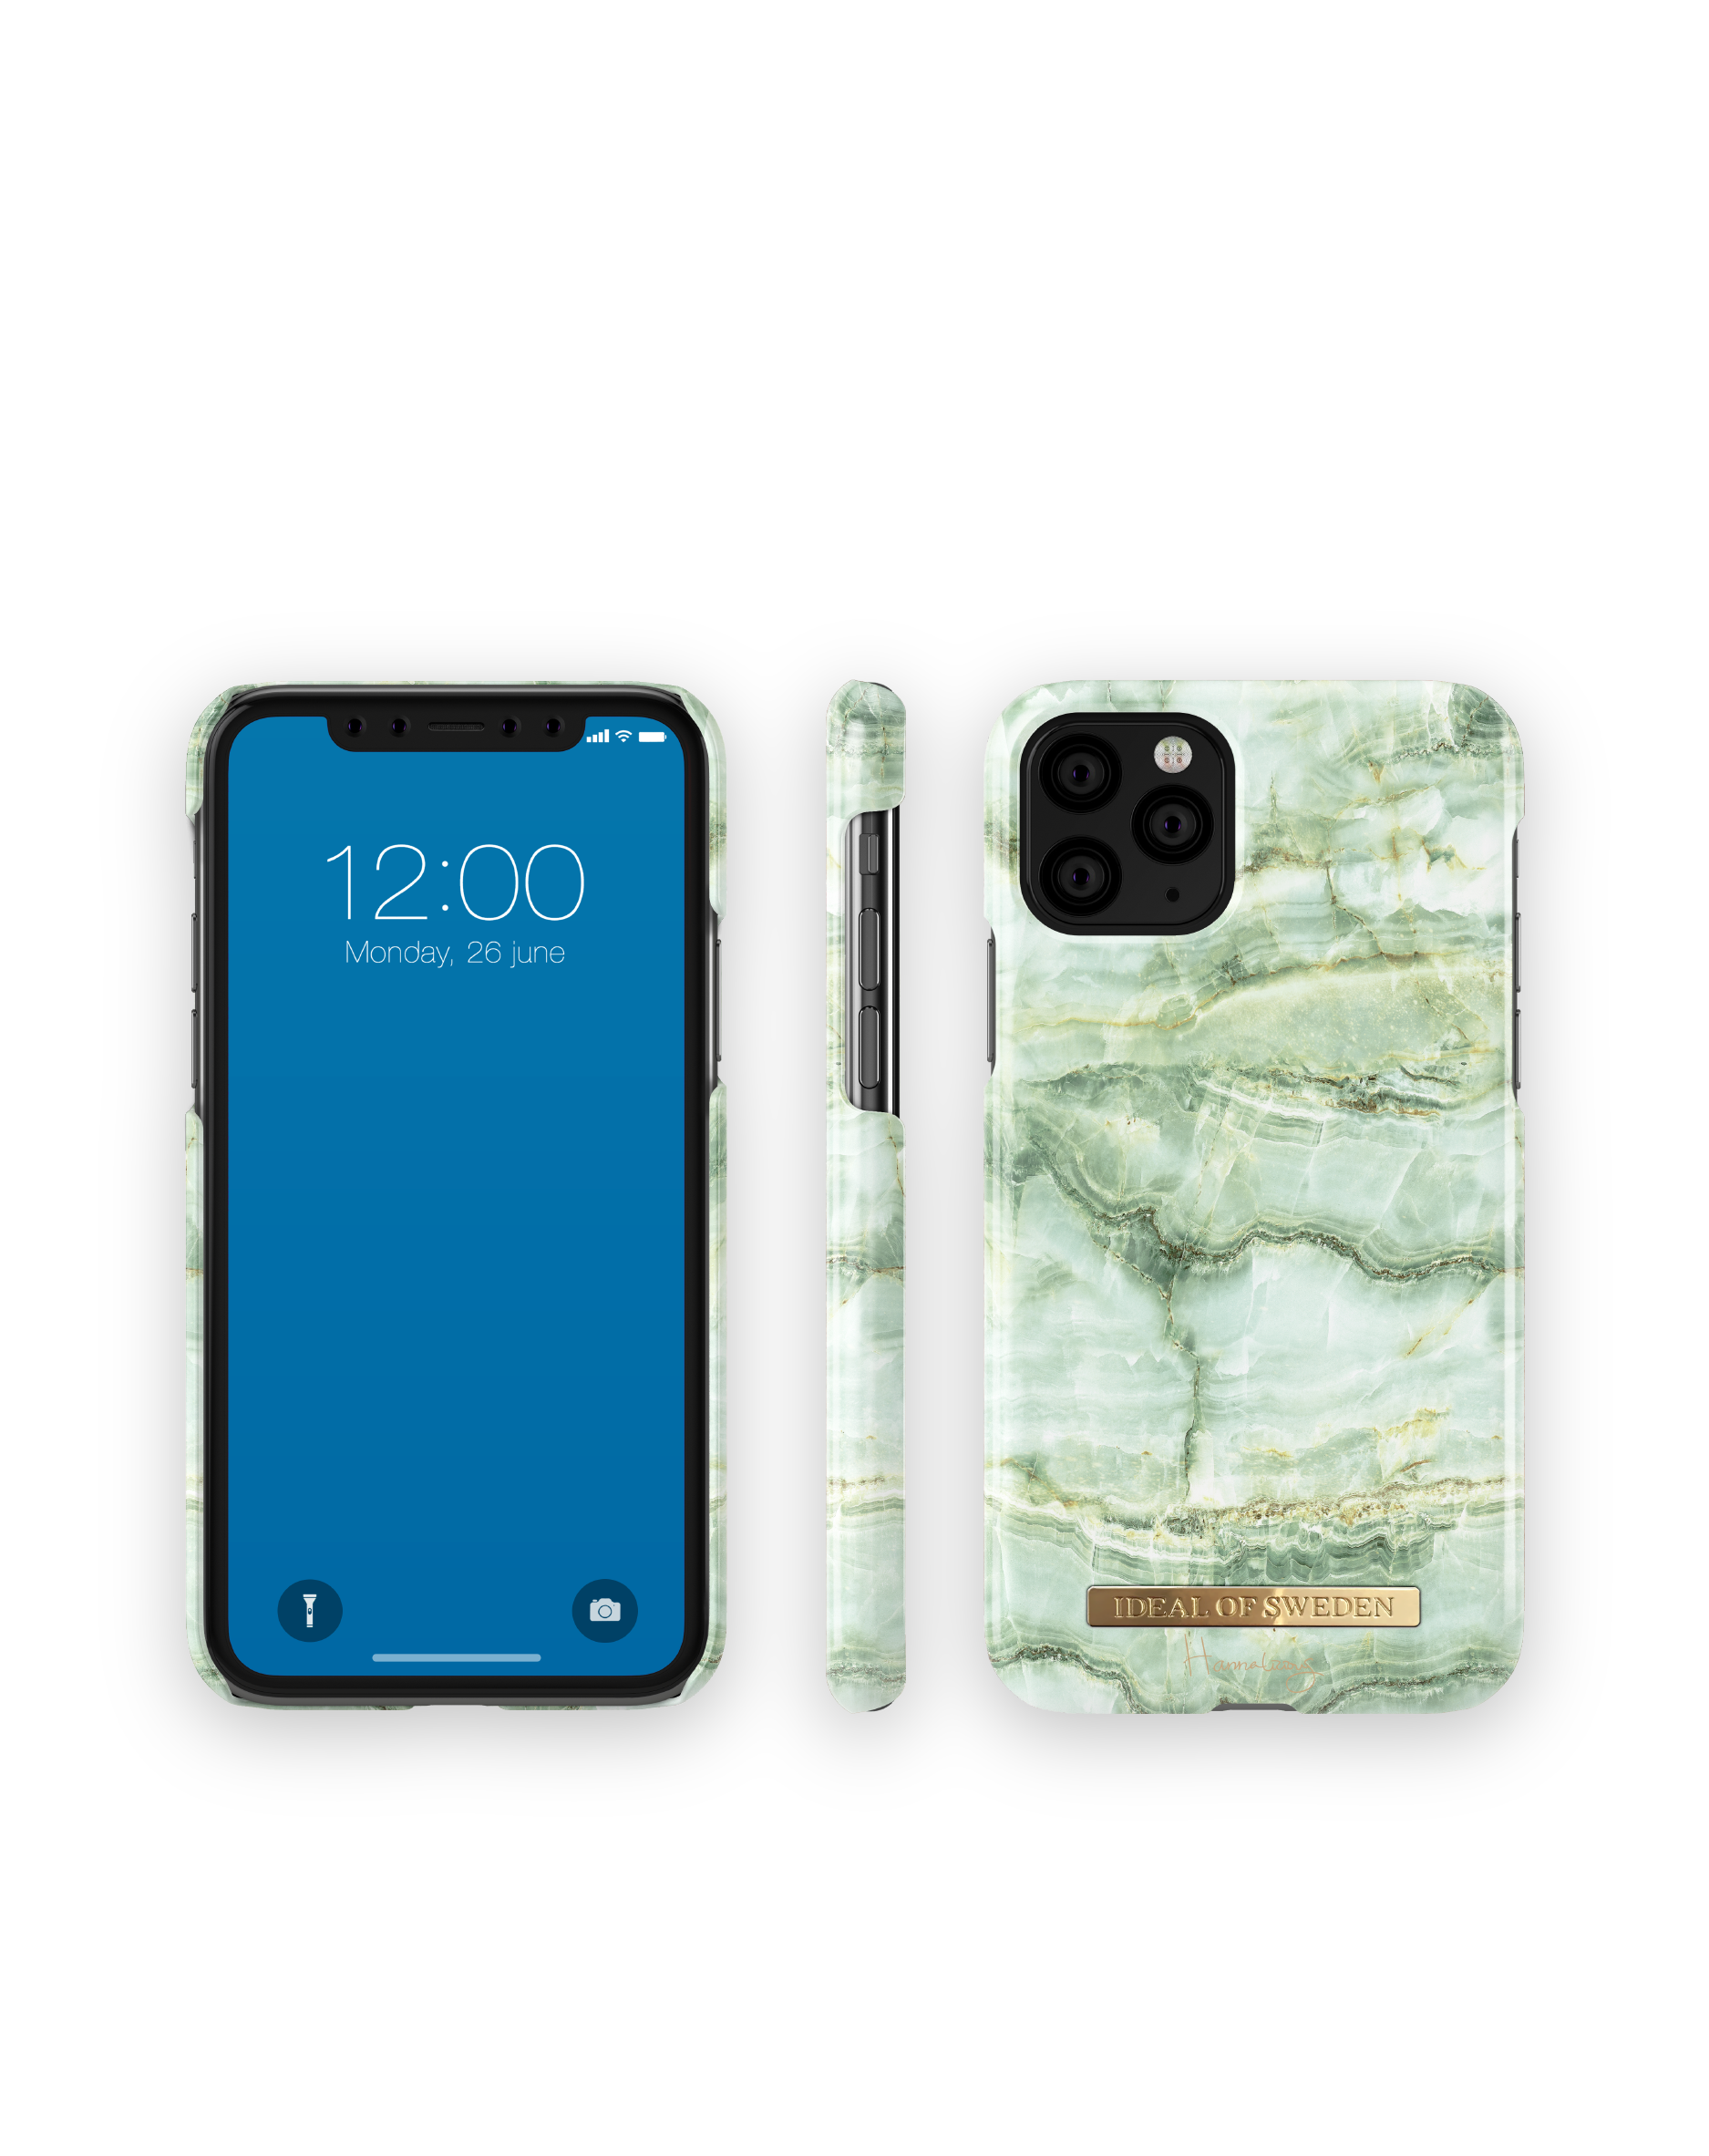 11 X, Pro, Mojito Apple XS, Backcover, iPhone OF Marble IDFCH2-I1958-125, Apple IDEAL Apple, iPhone iPhone Apple SWEDEN